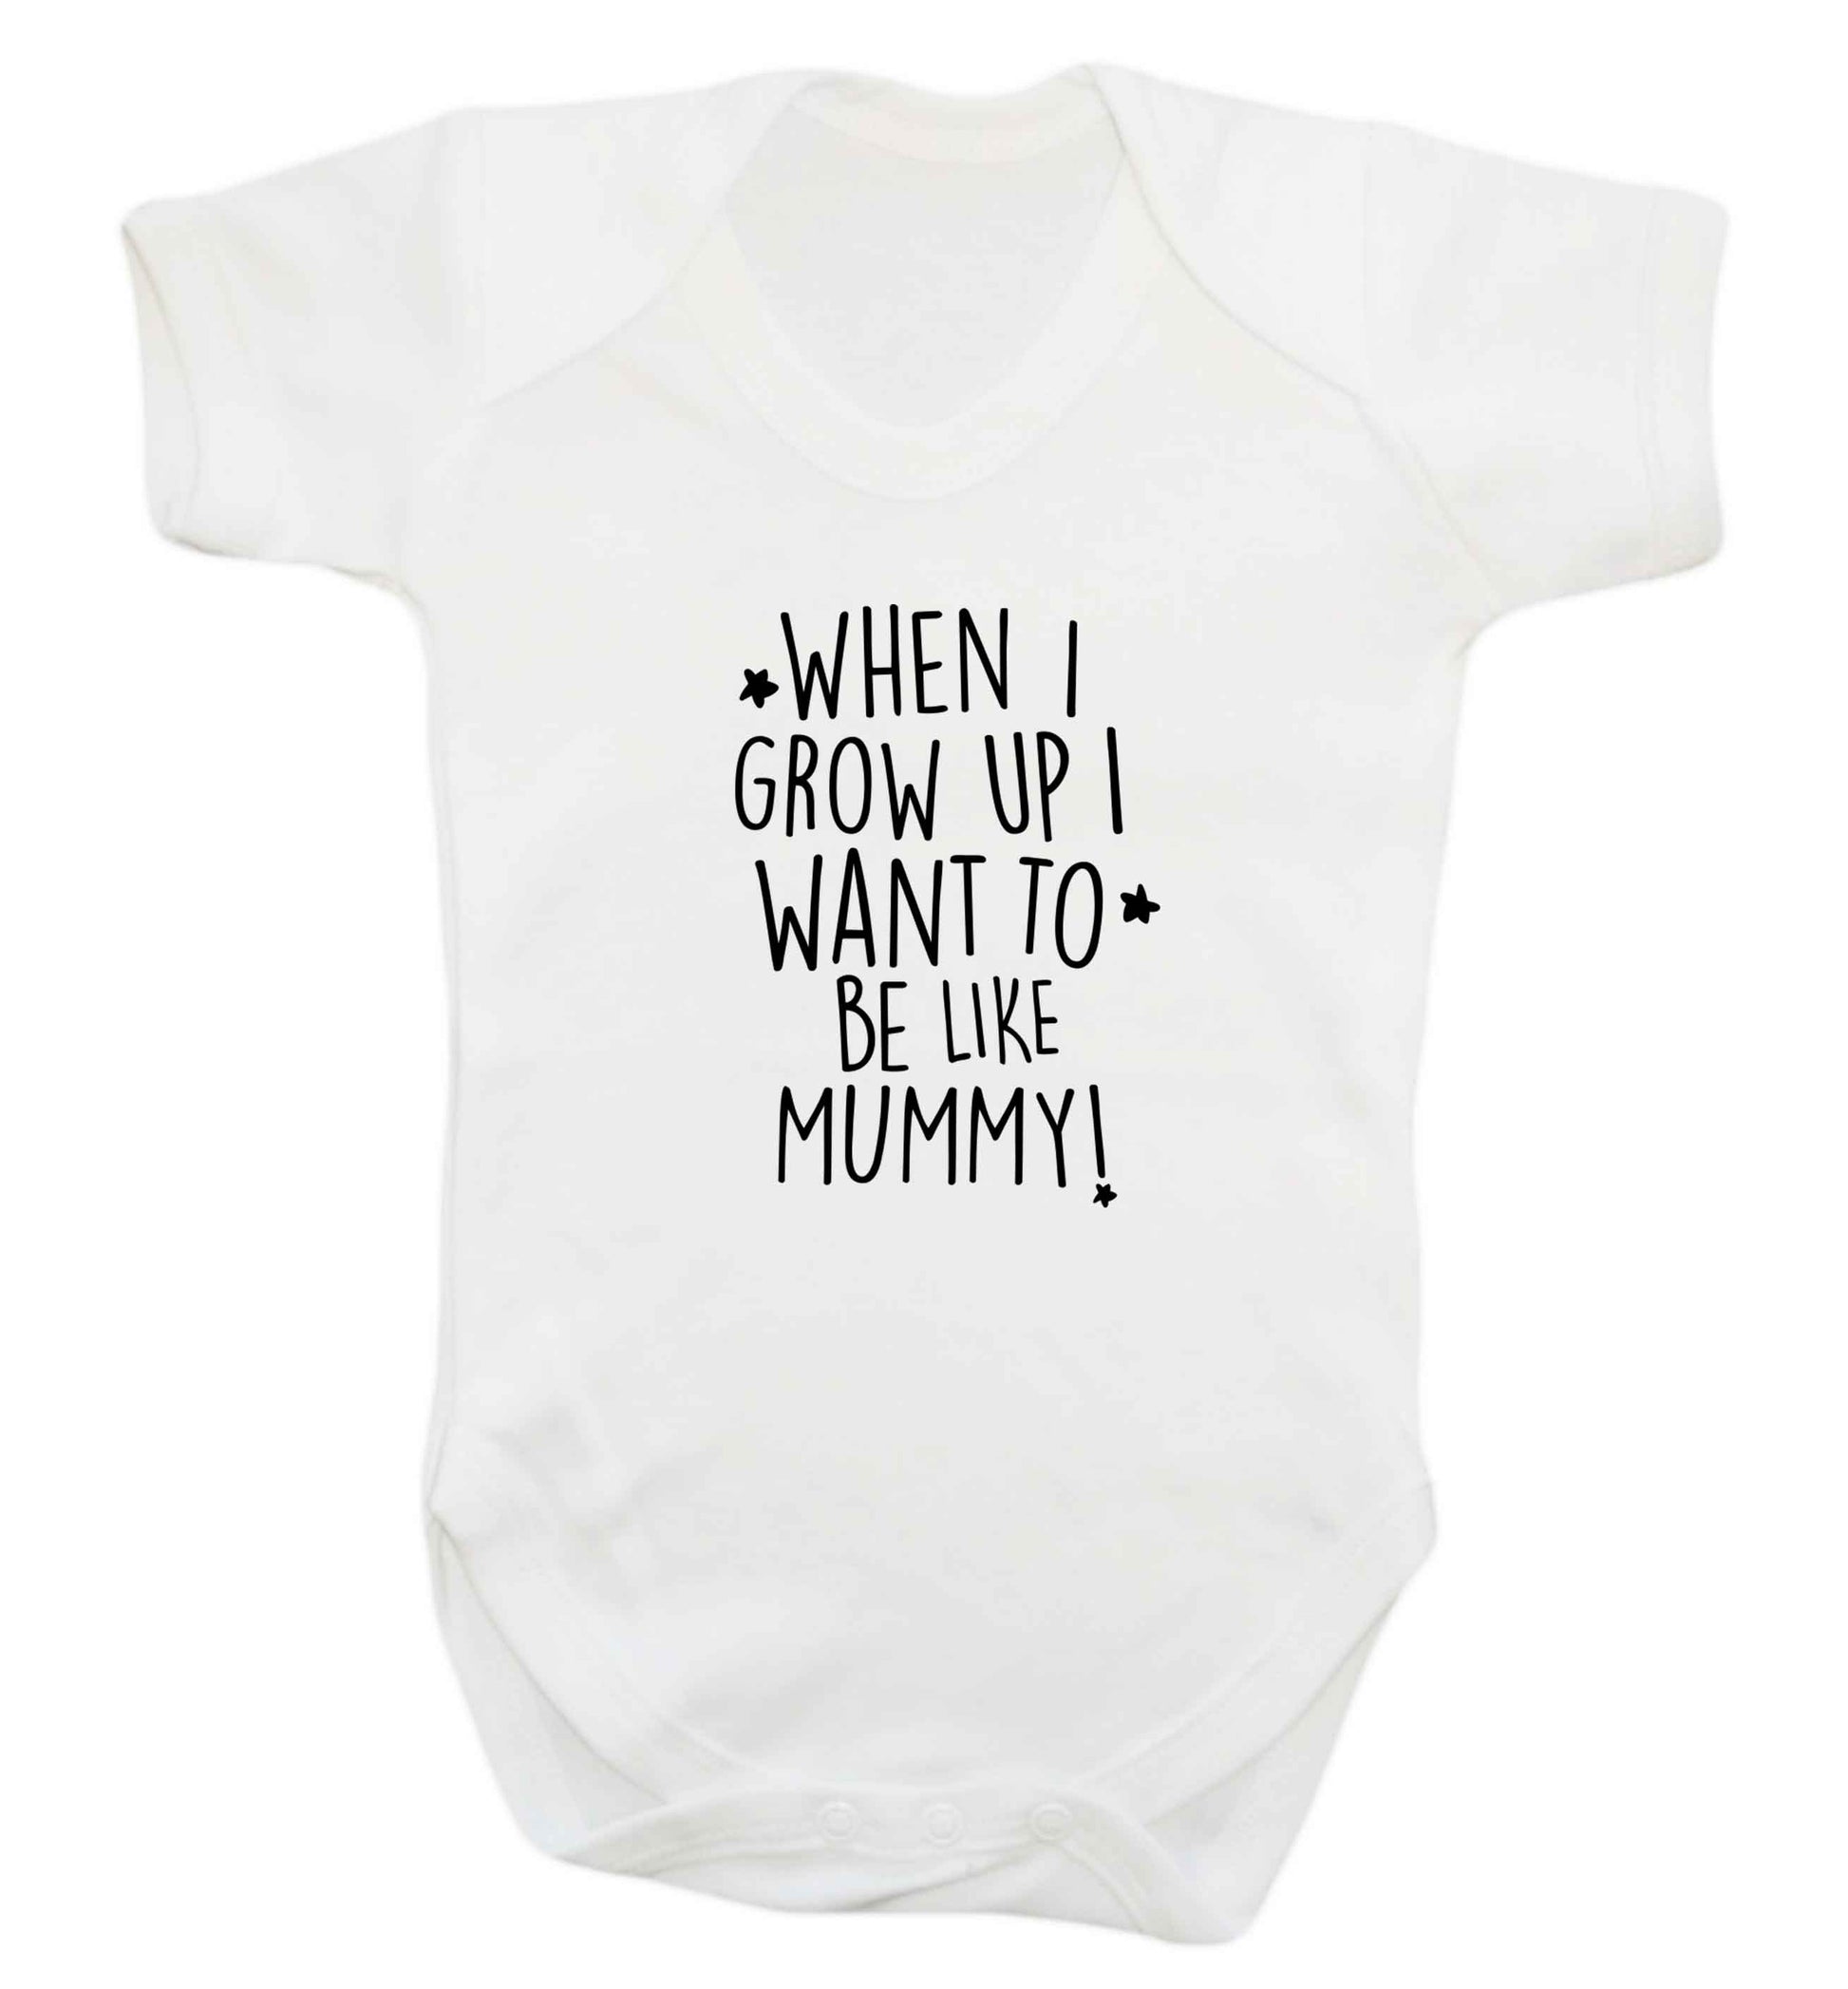 When I grow up I want to be like my mummy baby vest white 18-24 months